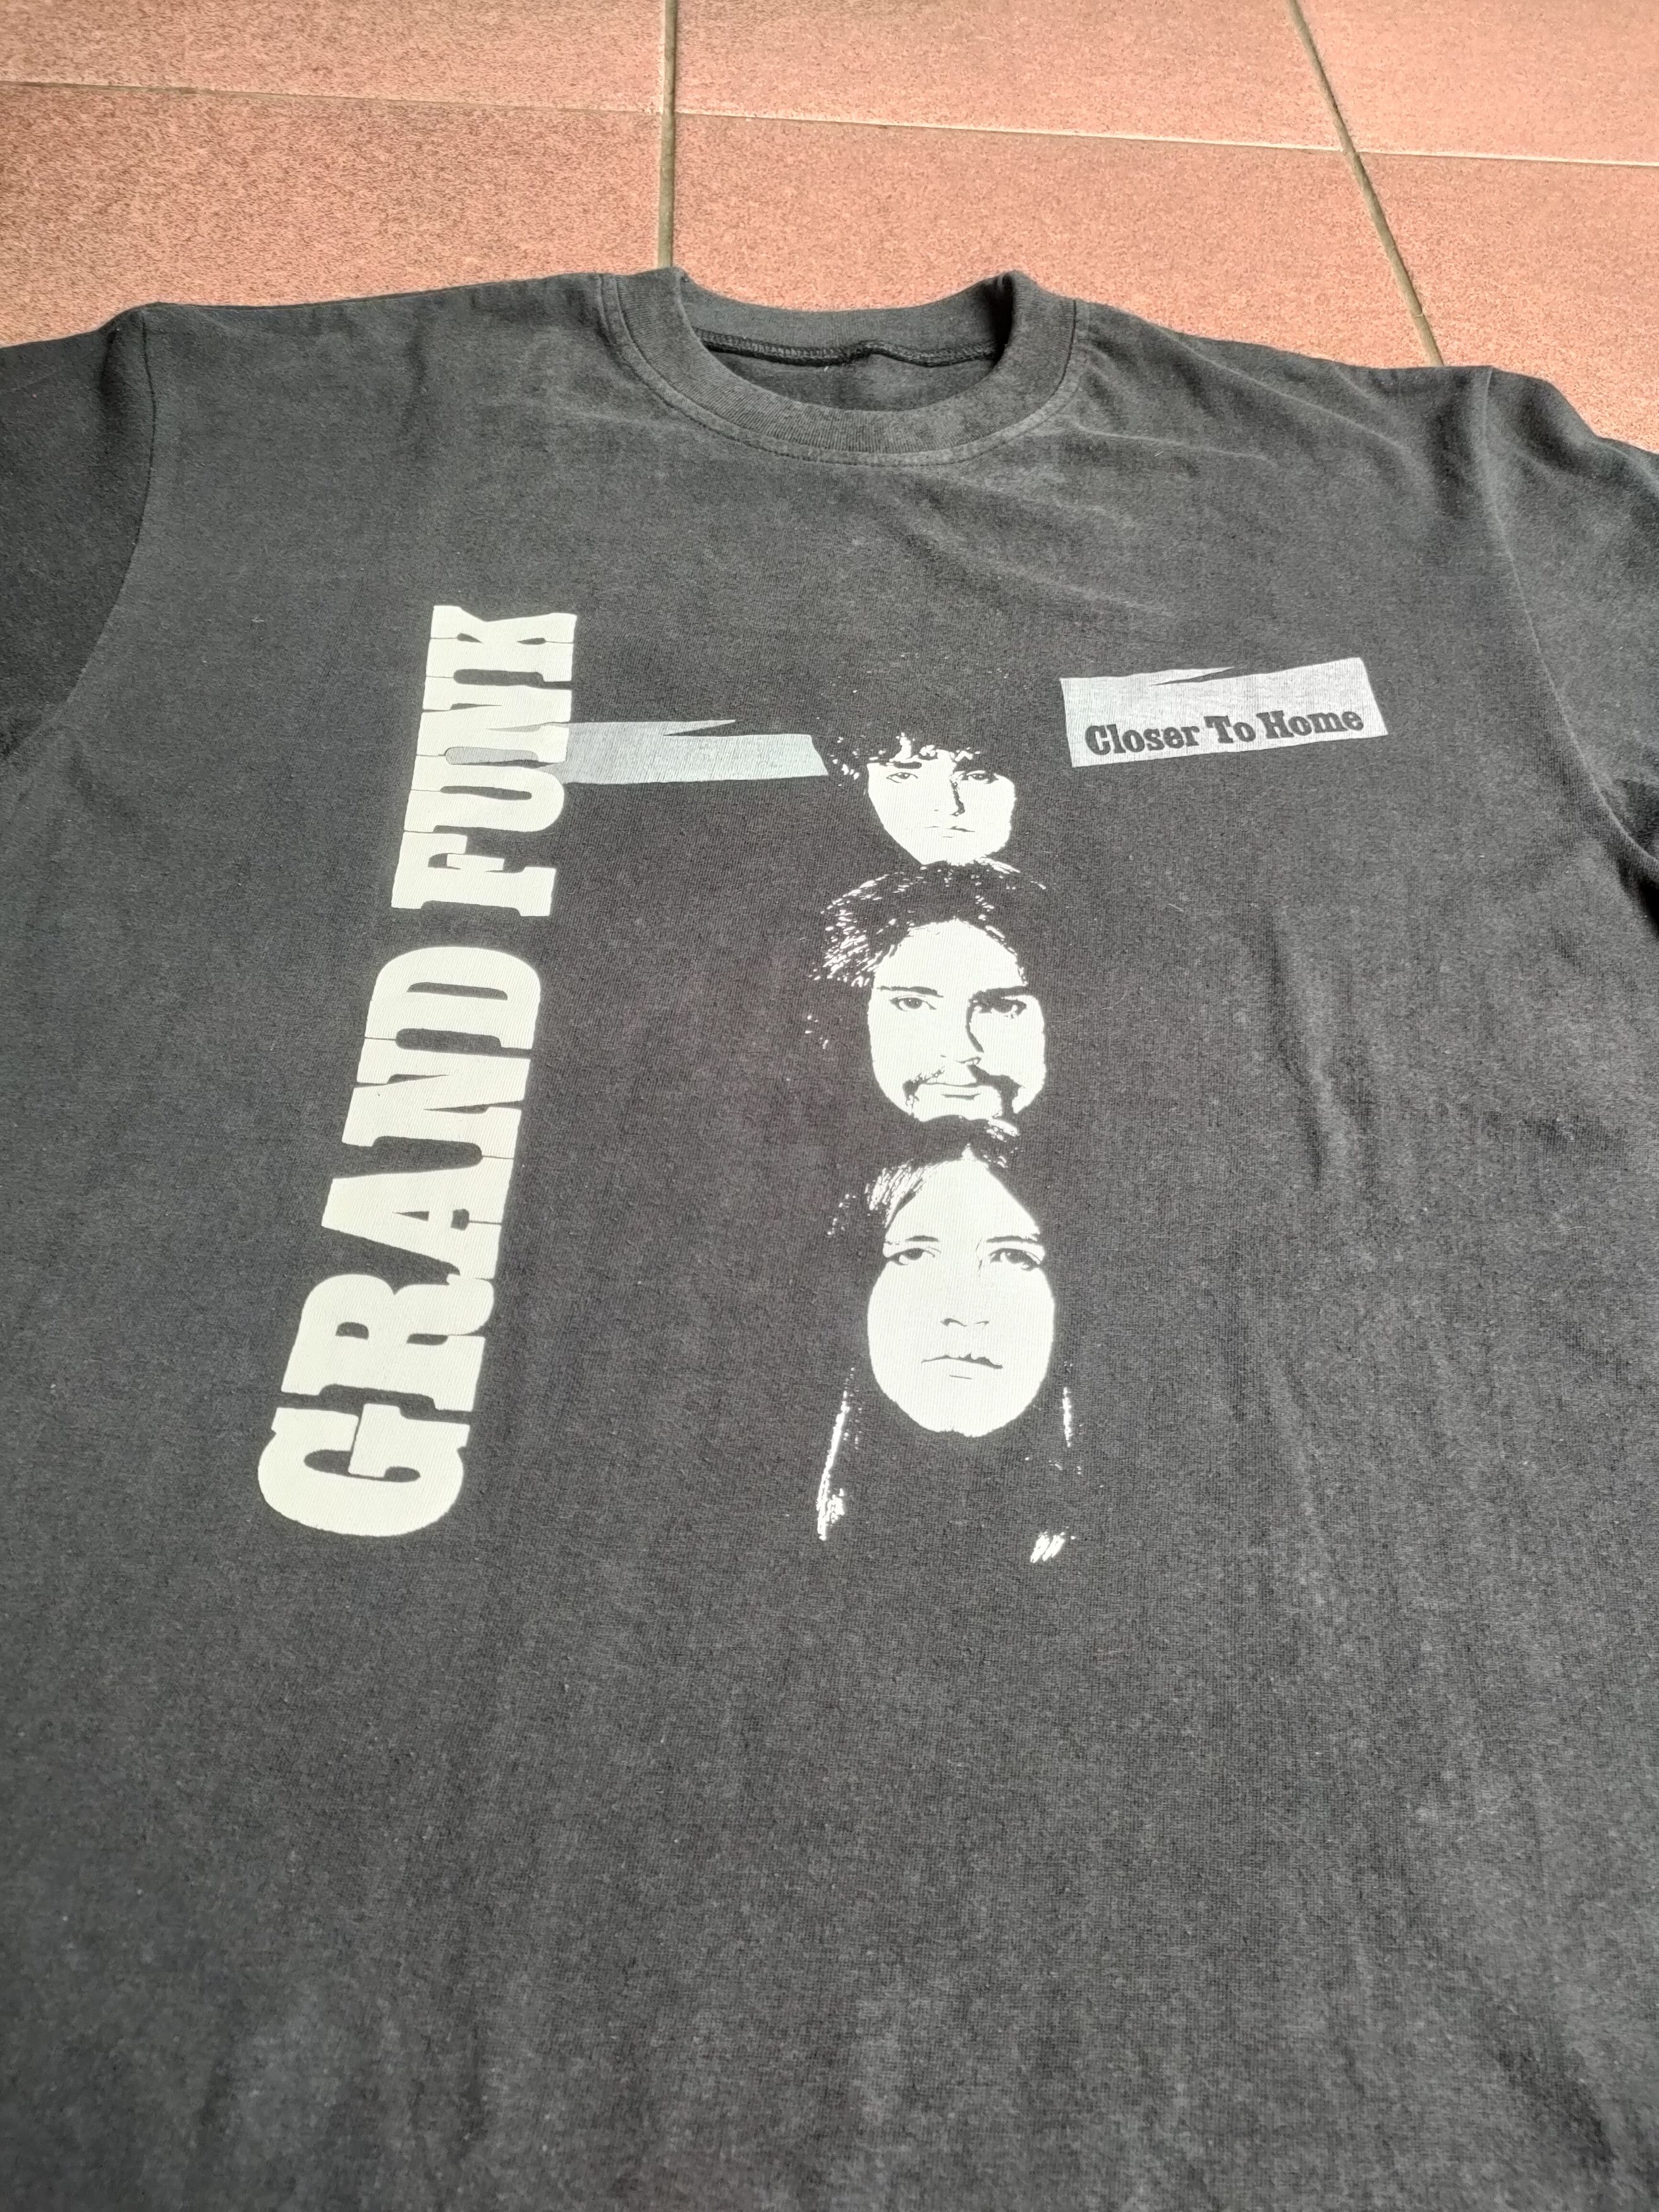 Vintage Grand Funk Closer To Home T-shirt - 3